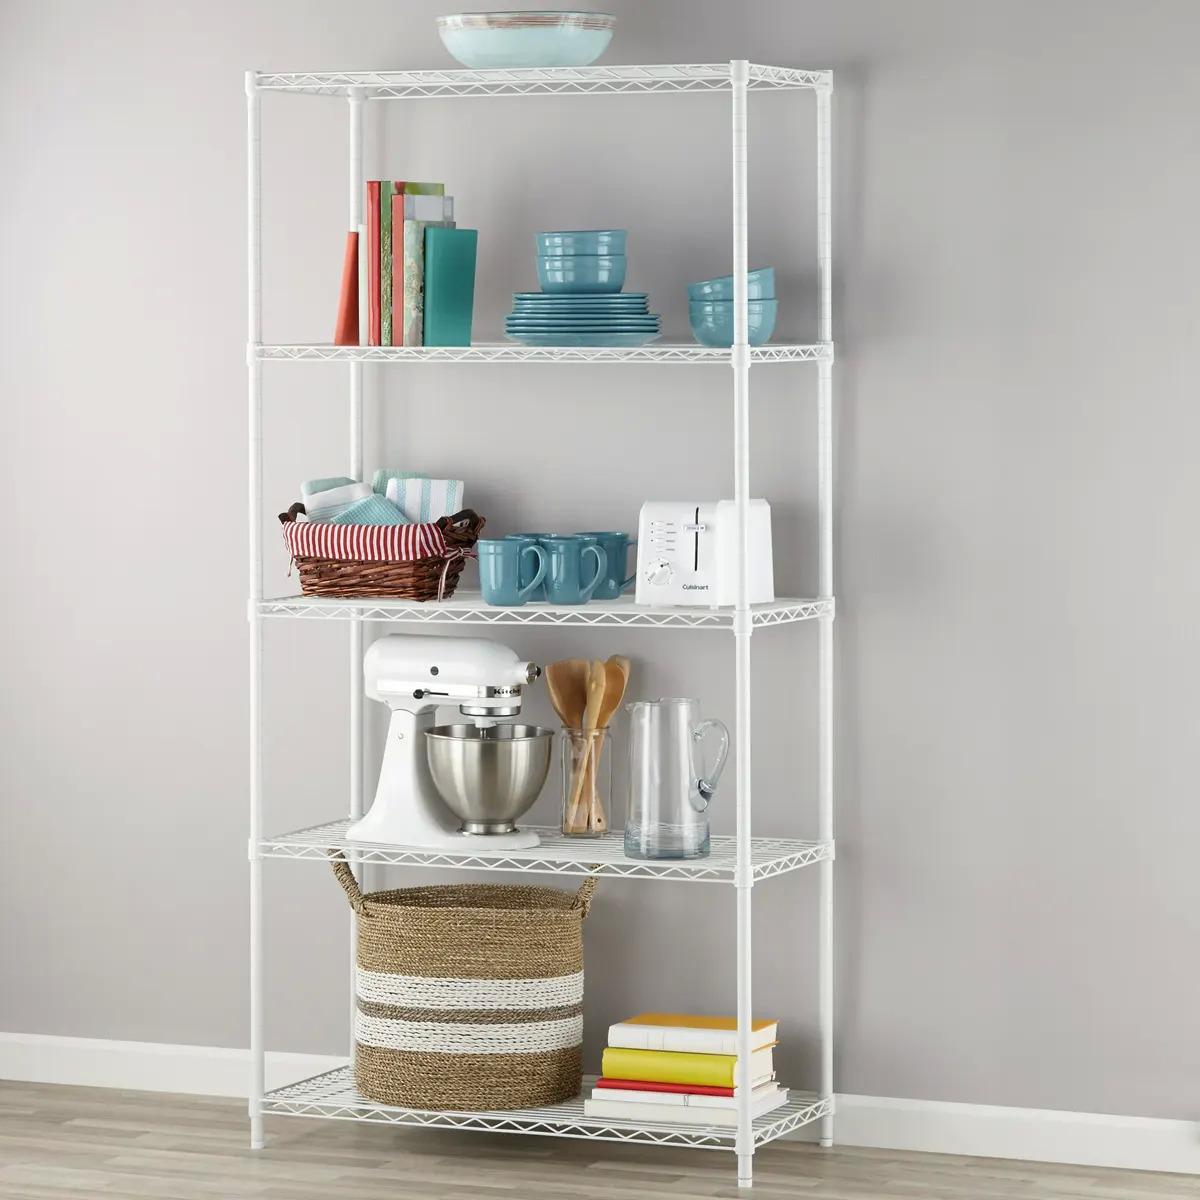 5-Tier Hyper Tough Steel Wire Shelving Unit for $56.45 Shipped